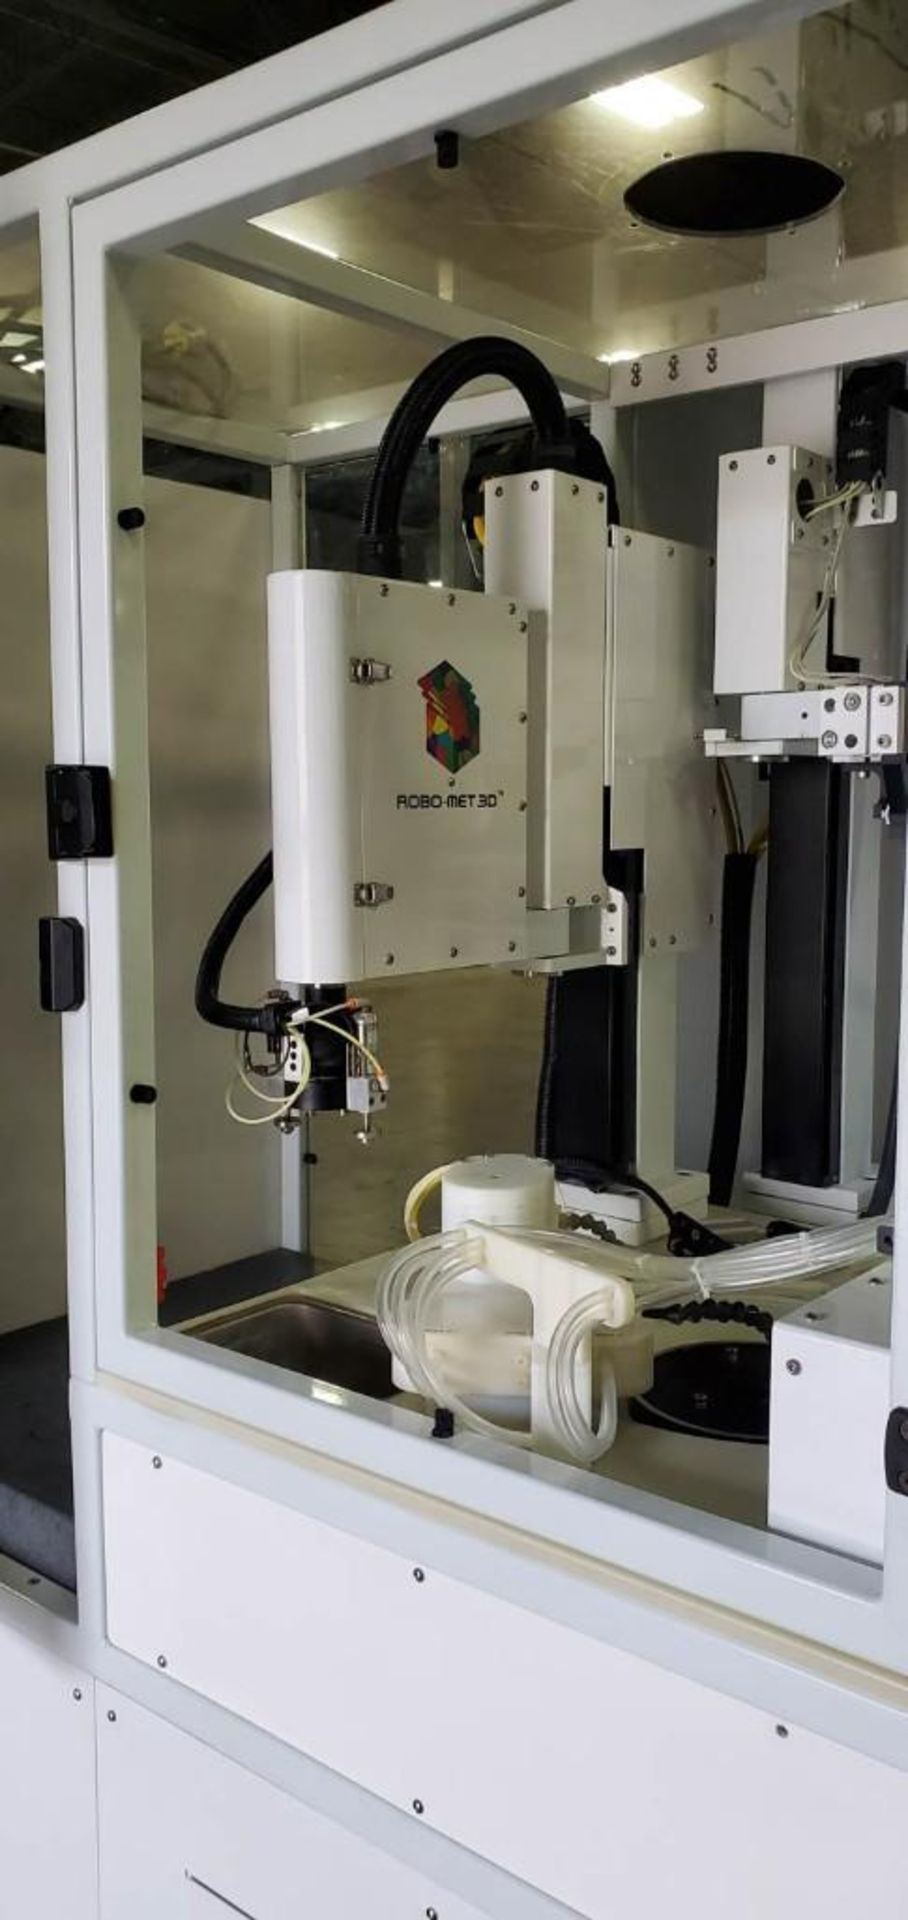 2013 UES Model Robomet 3D Automated Robotic Metallographic Preparation and 3D Photo System - Image 13 of 53